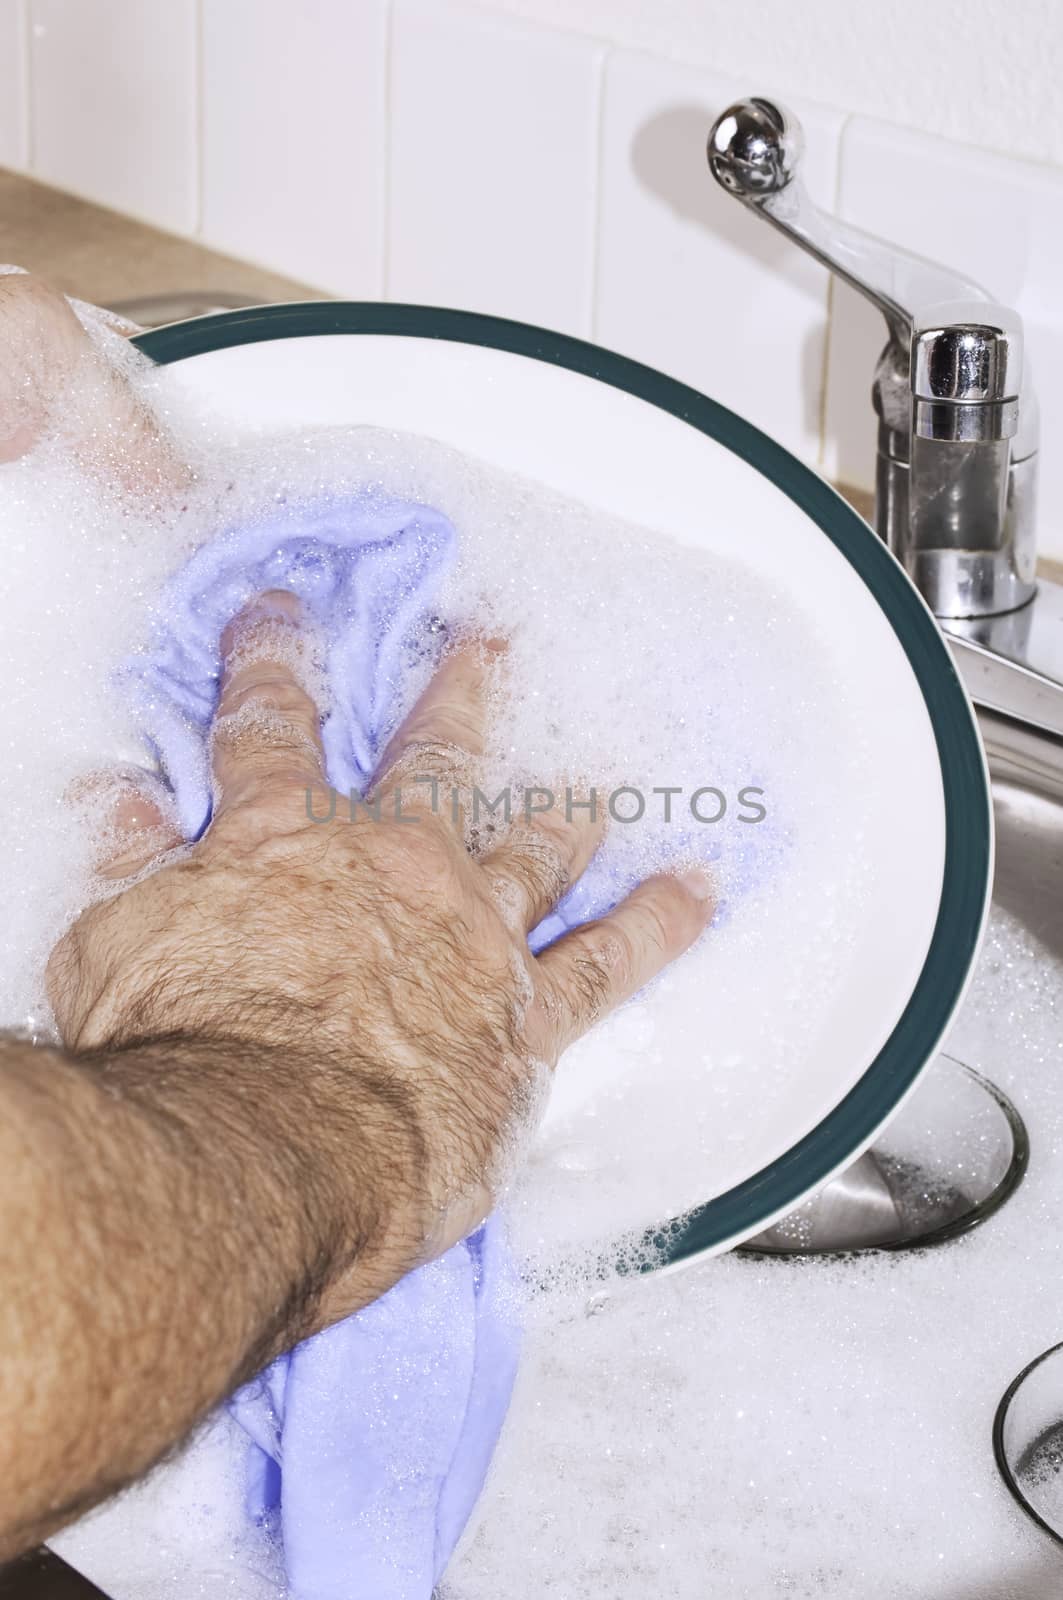 Washing dishes in the sink by hand.